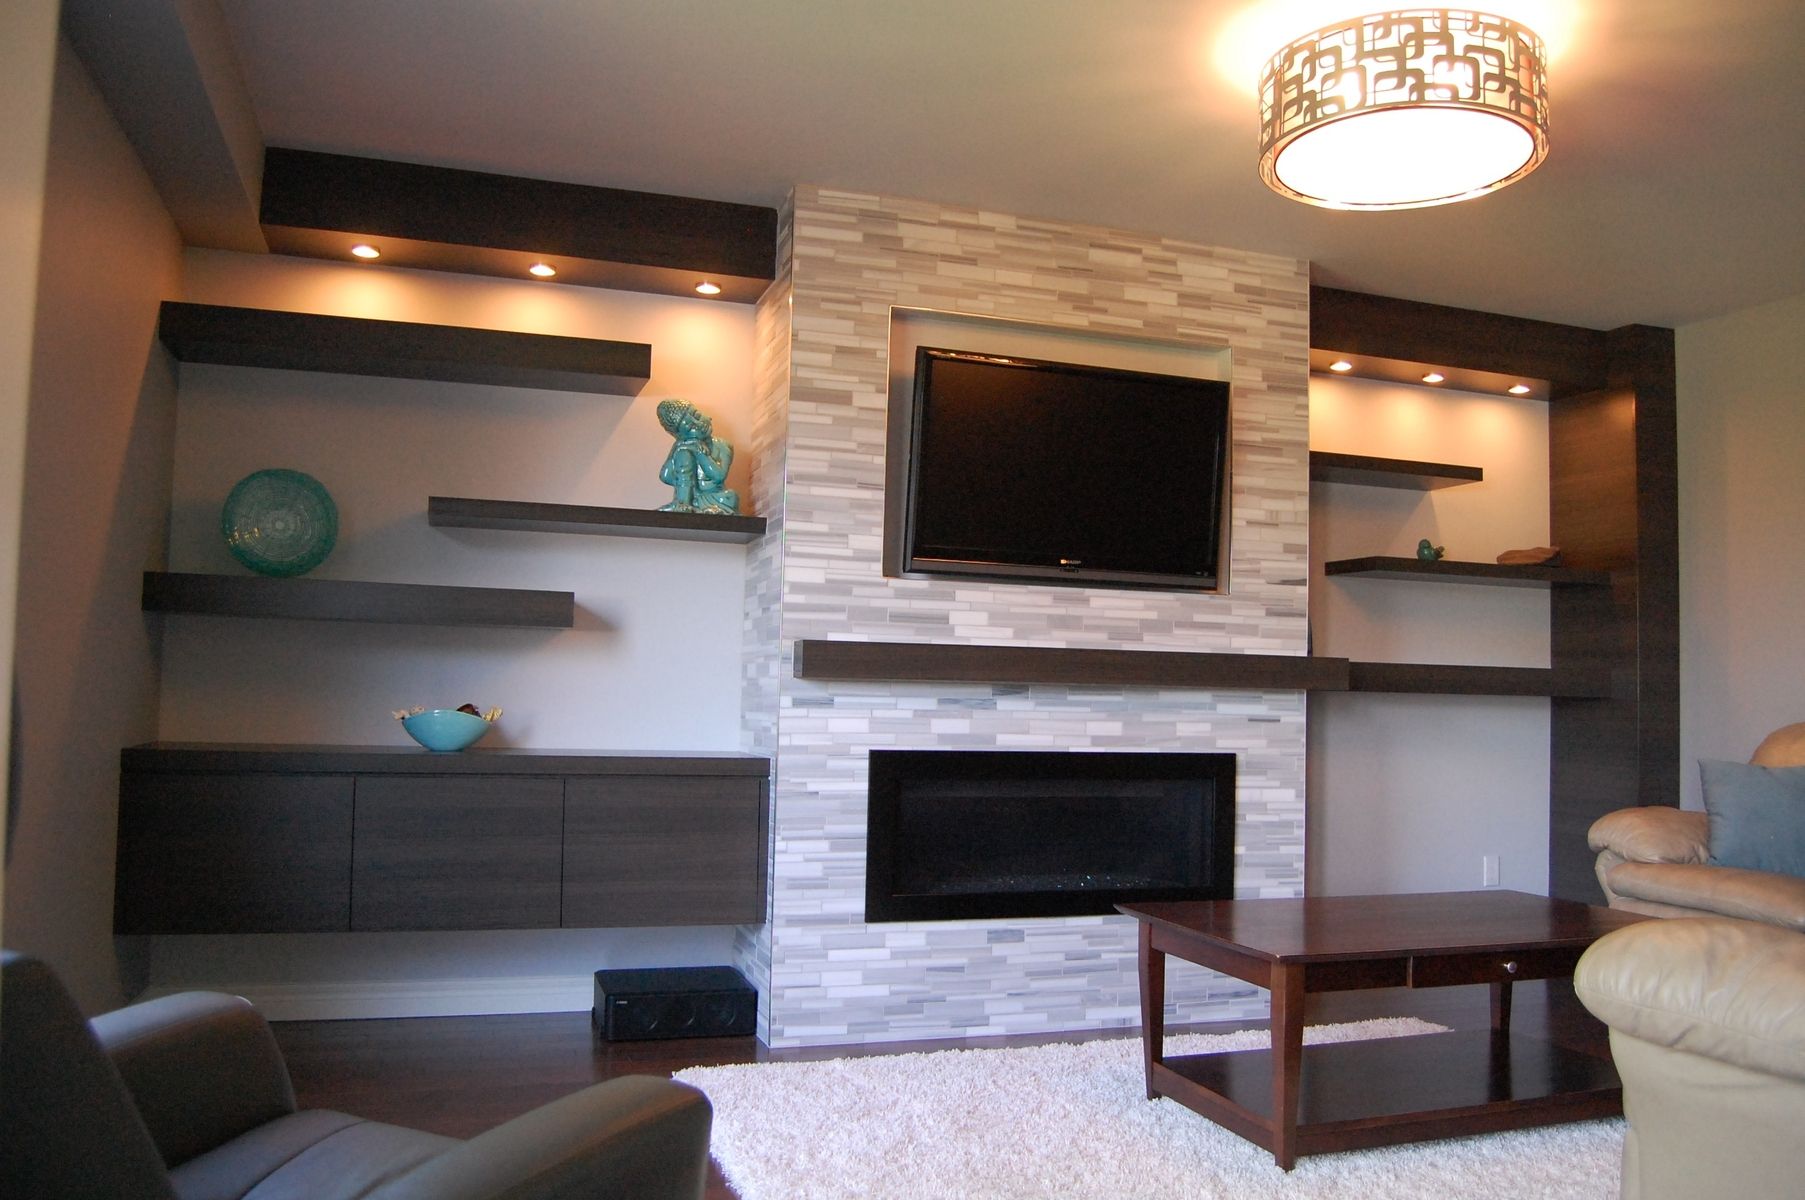 Bedroom Fireplace Ideas Luxury Custom Modern Wall Unit Made Pletely From A Printed